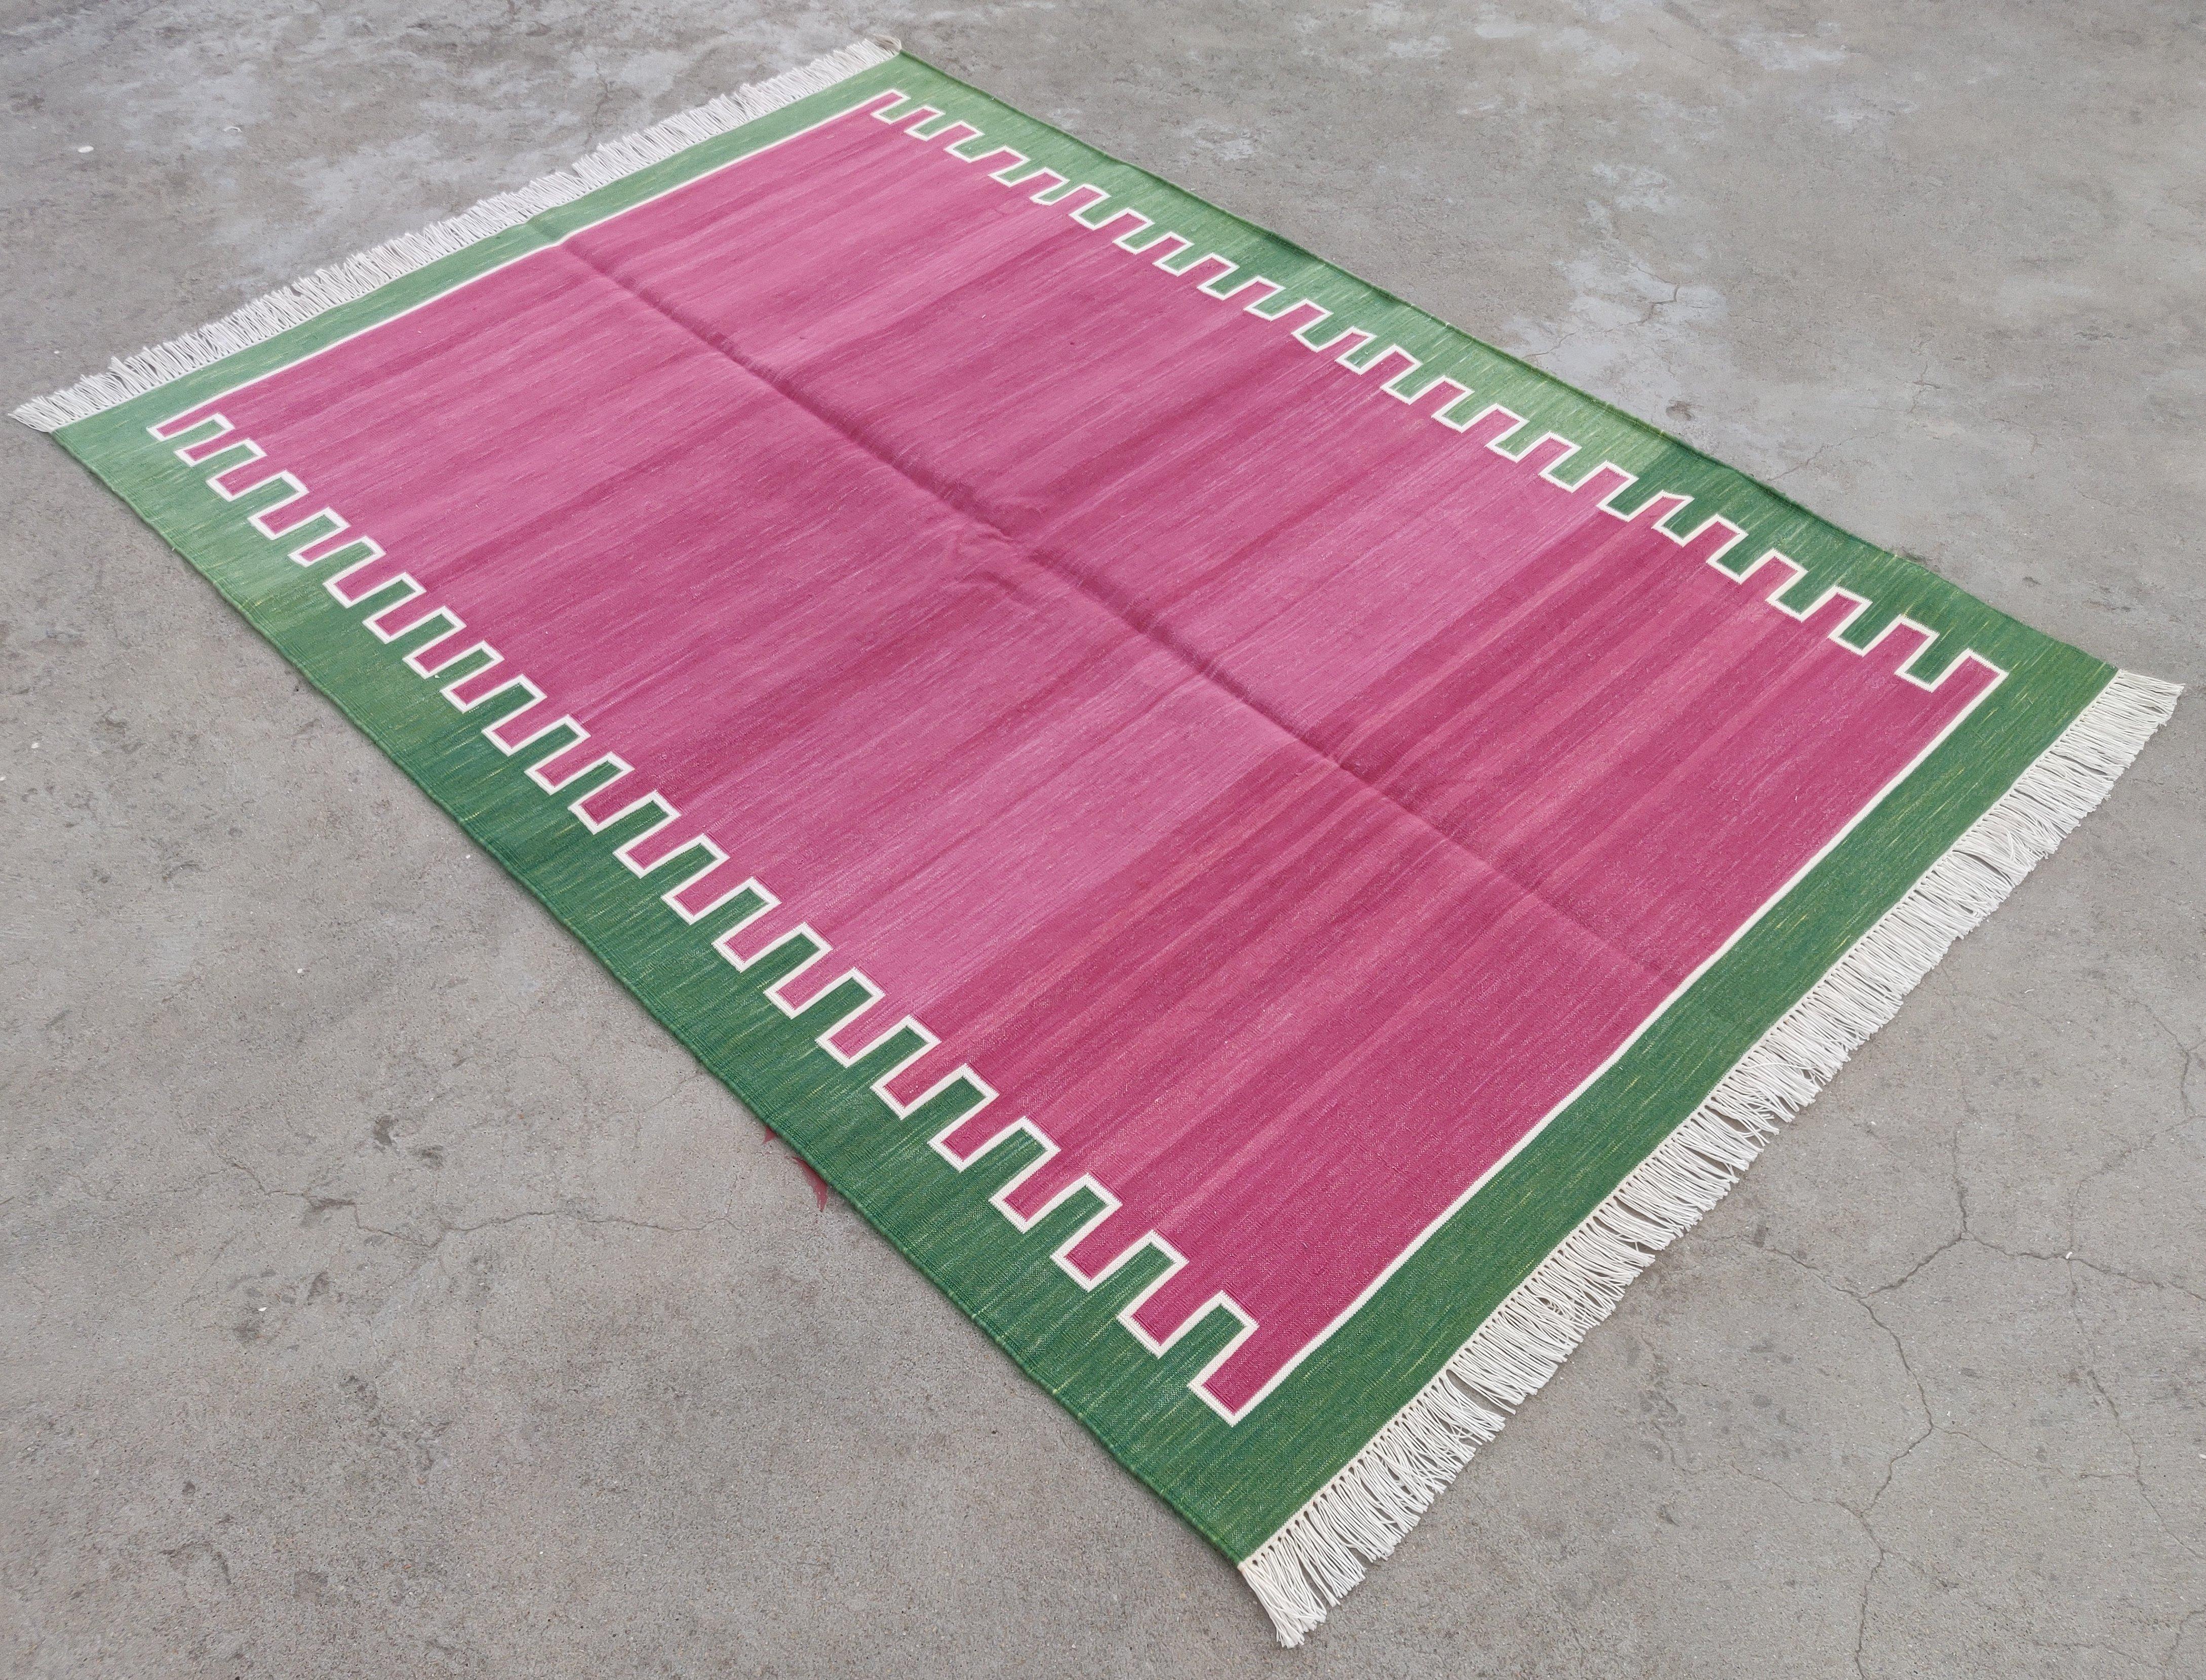 Cotton Vegetable Dyed Raspberry Pink and Green Zig Zag Striped Indian Dhurrie Rug-4'x6' 

These special flat-weave dhurries are hand-woven with 15 ply 100% cotton yarn. Due to the special manufacturing techniques used to create our rugs, the size